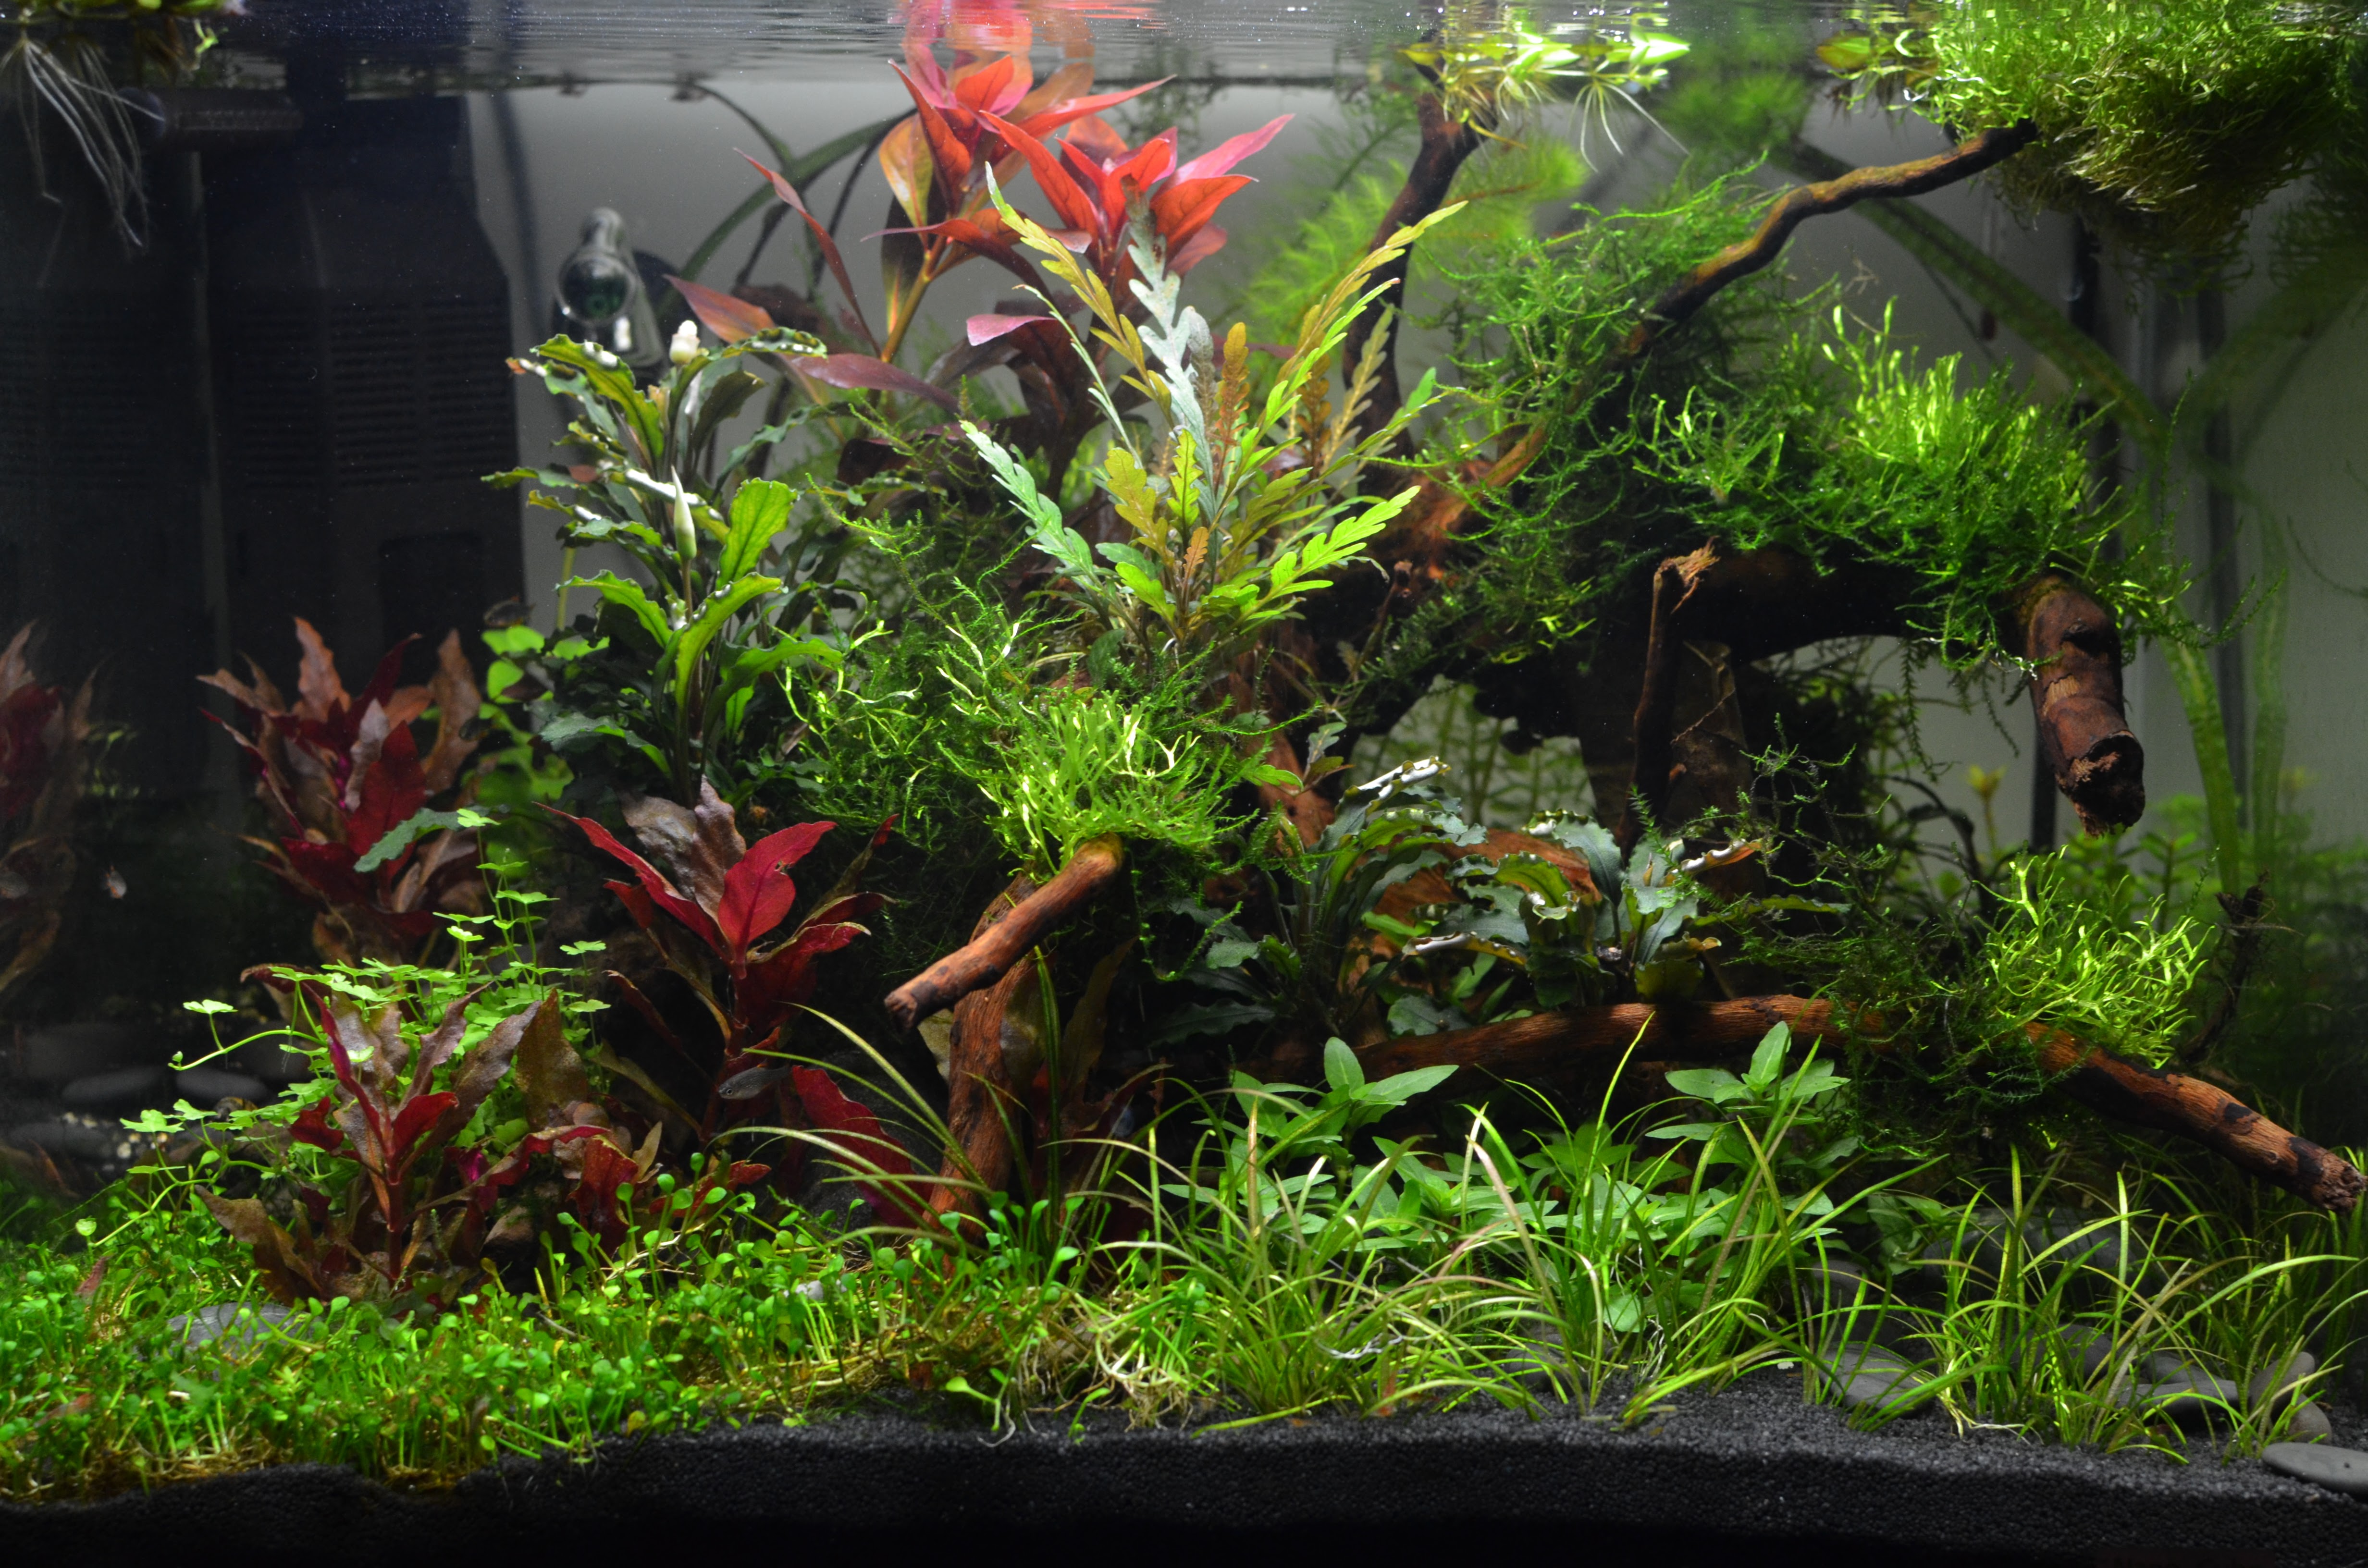 Scapers Tank 50l Nov 2016 frontal